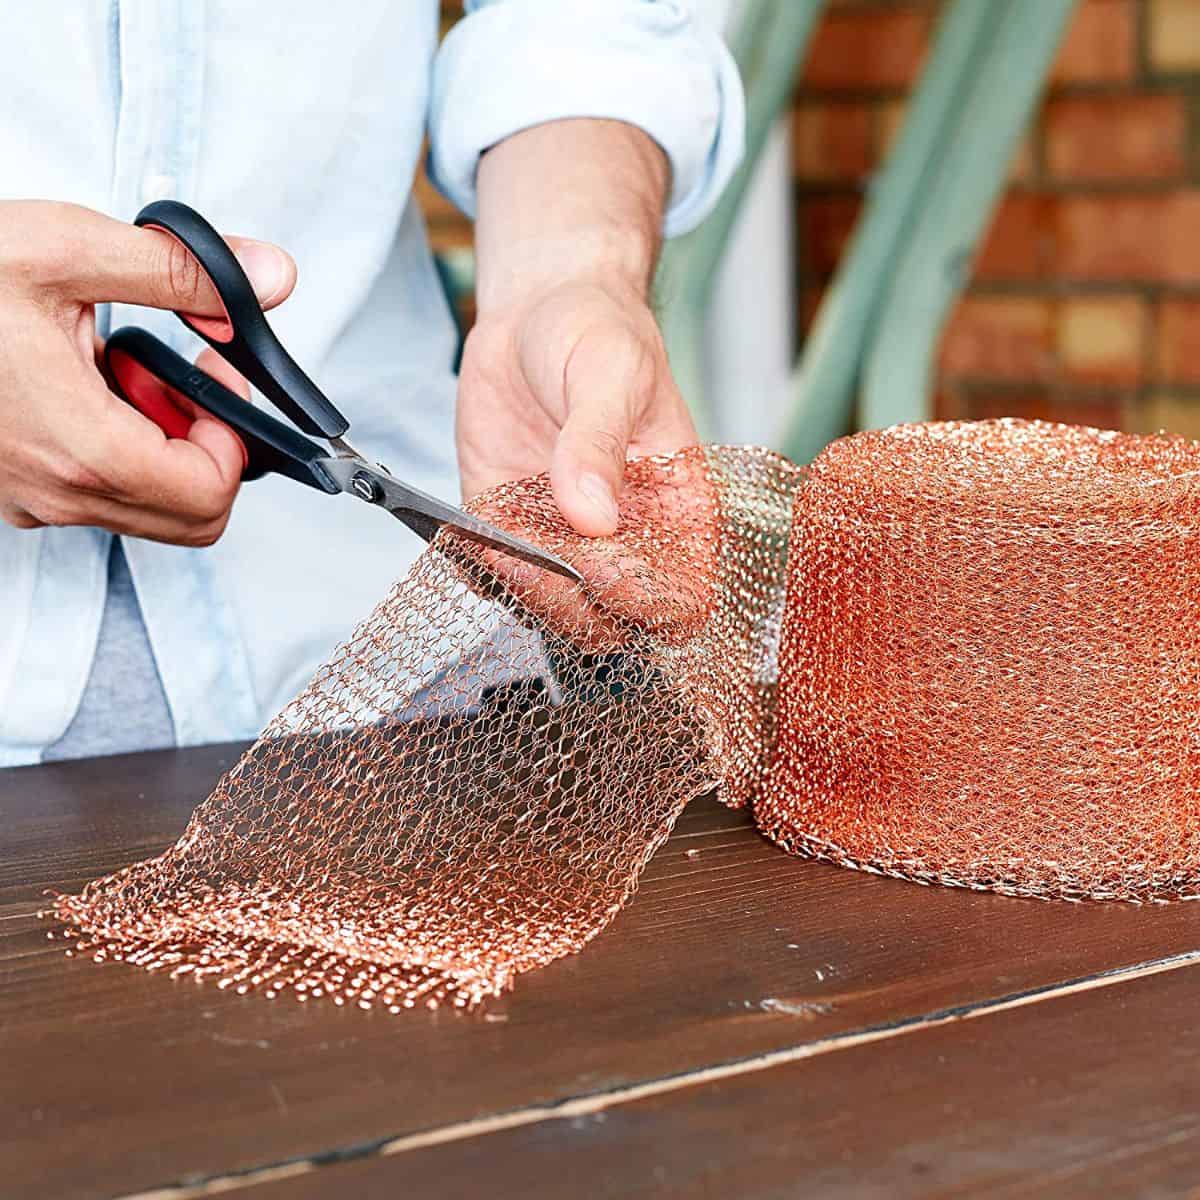 Hands cutting copper mesh with scissors.